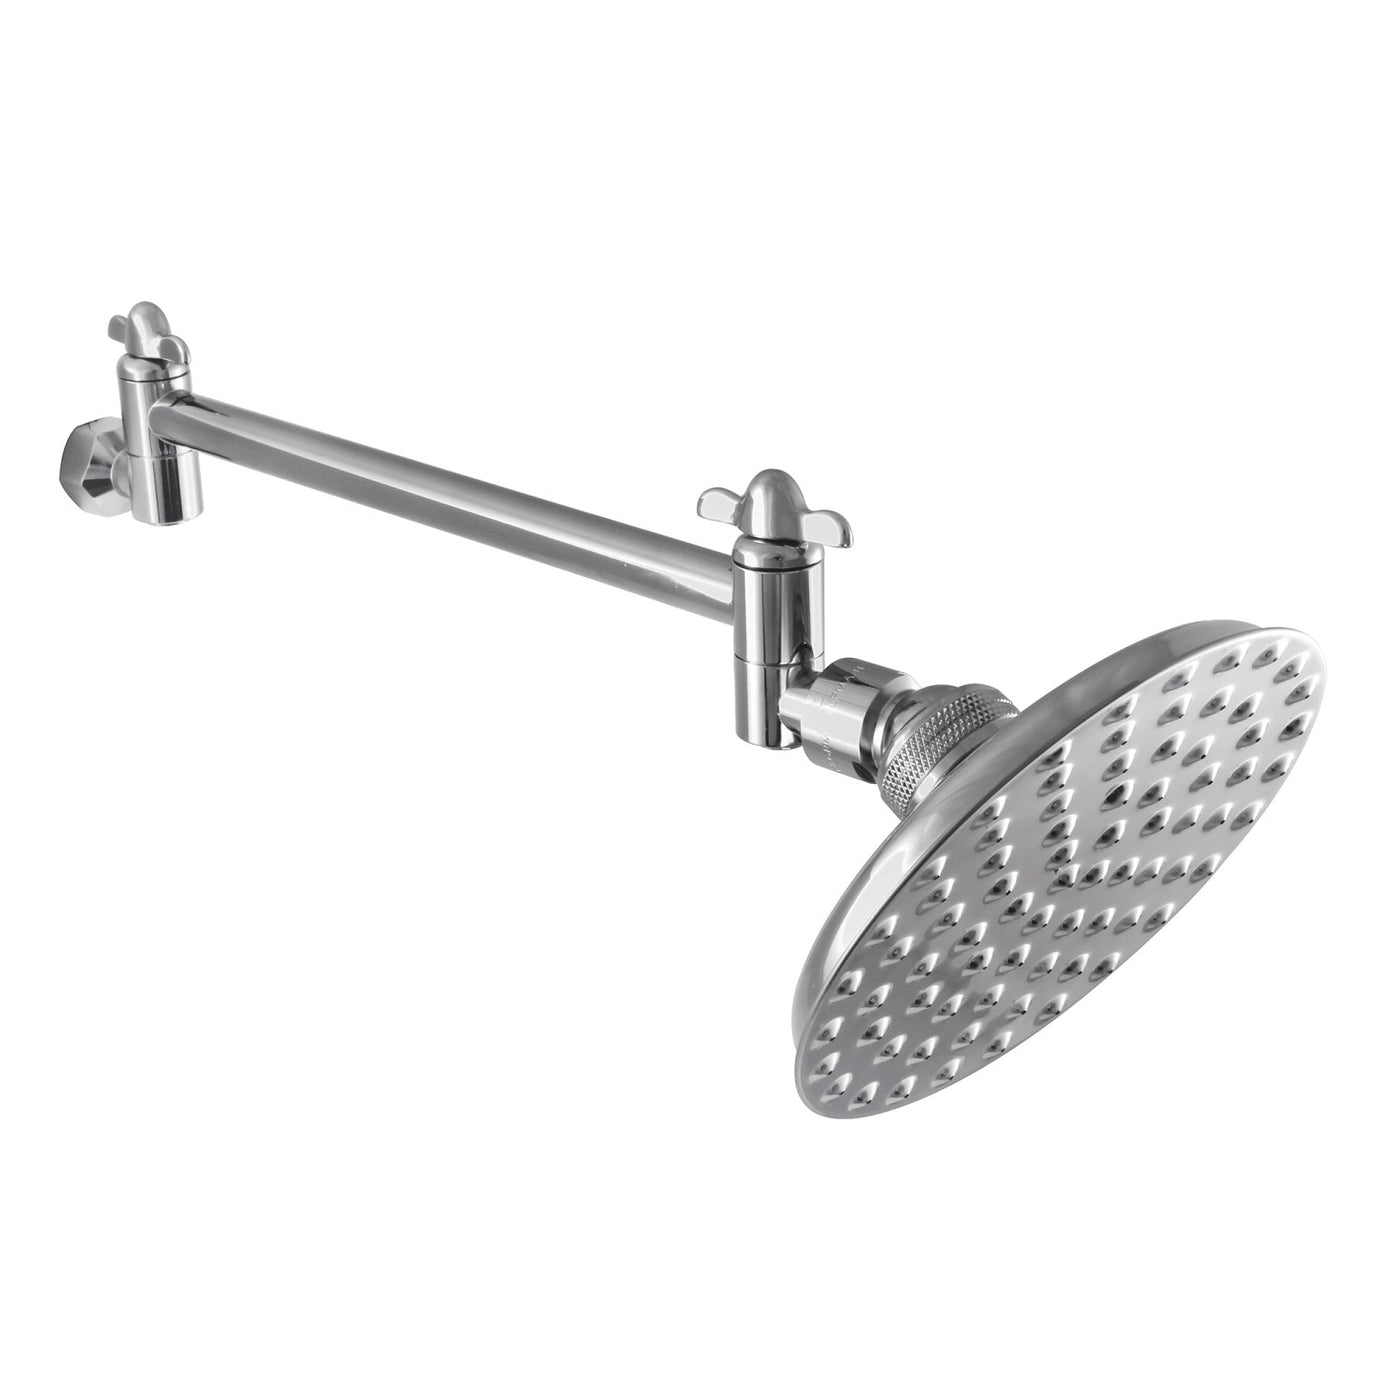 Elements of Design DK13521 5-1/4 Inch OD Showerhead with 10-Inch Shower Arm, Polished Chrome